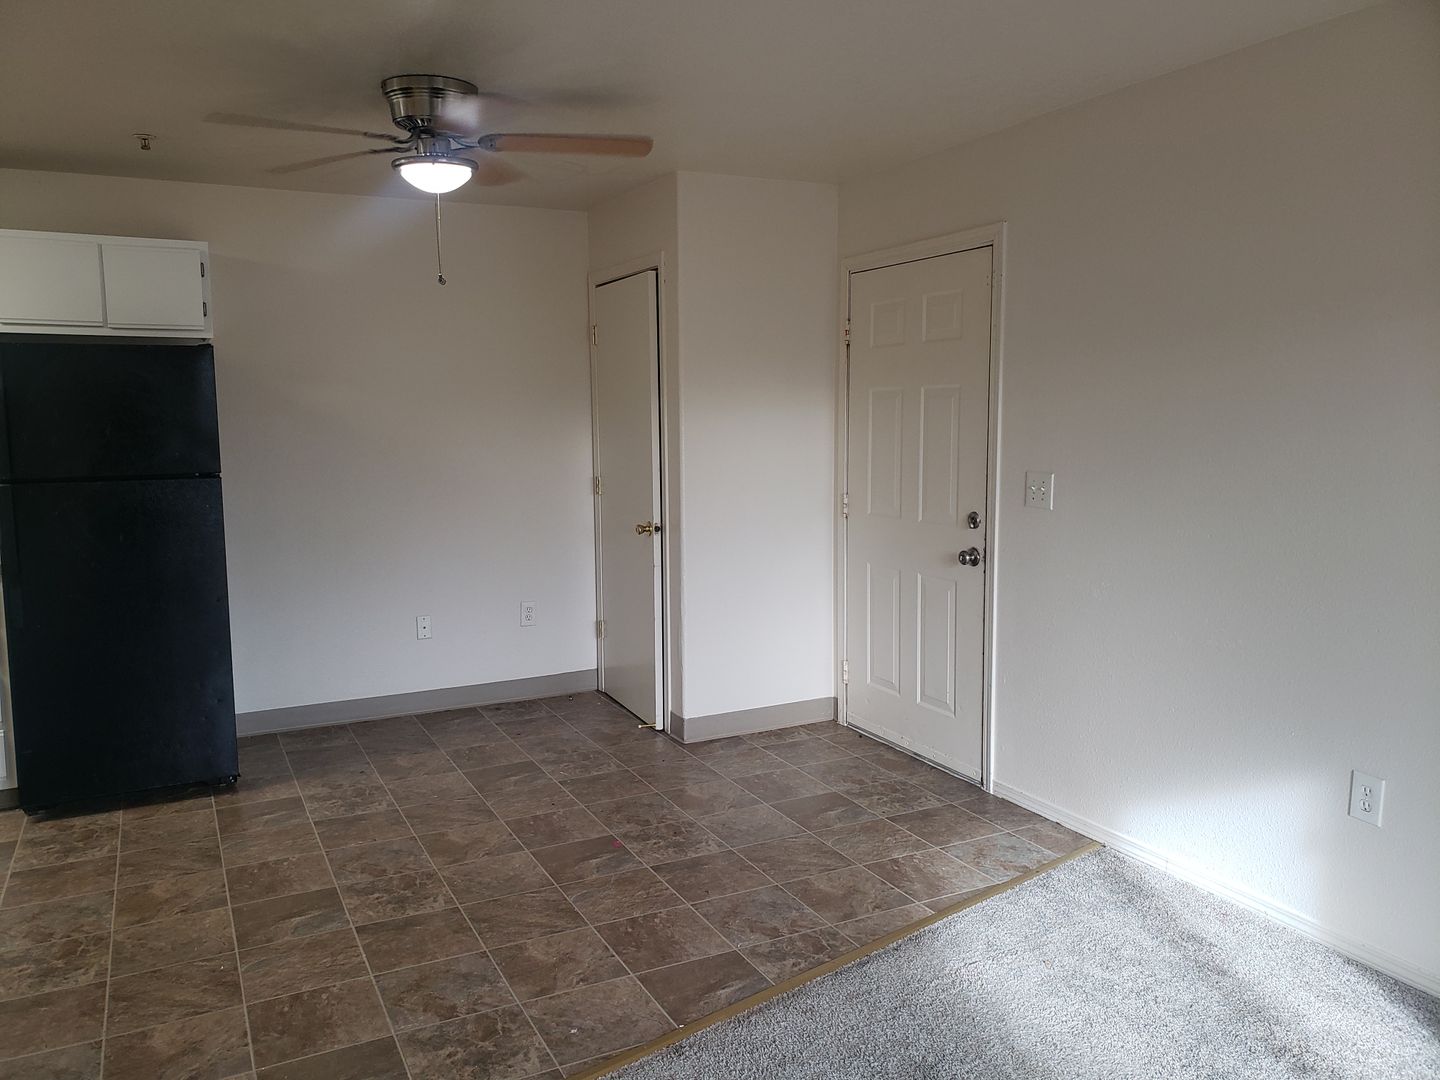 Conveniently Located Large 3-bedroom/2 bath Apartment